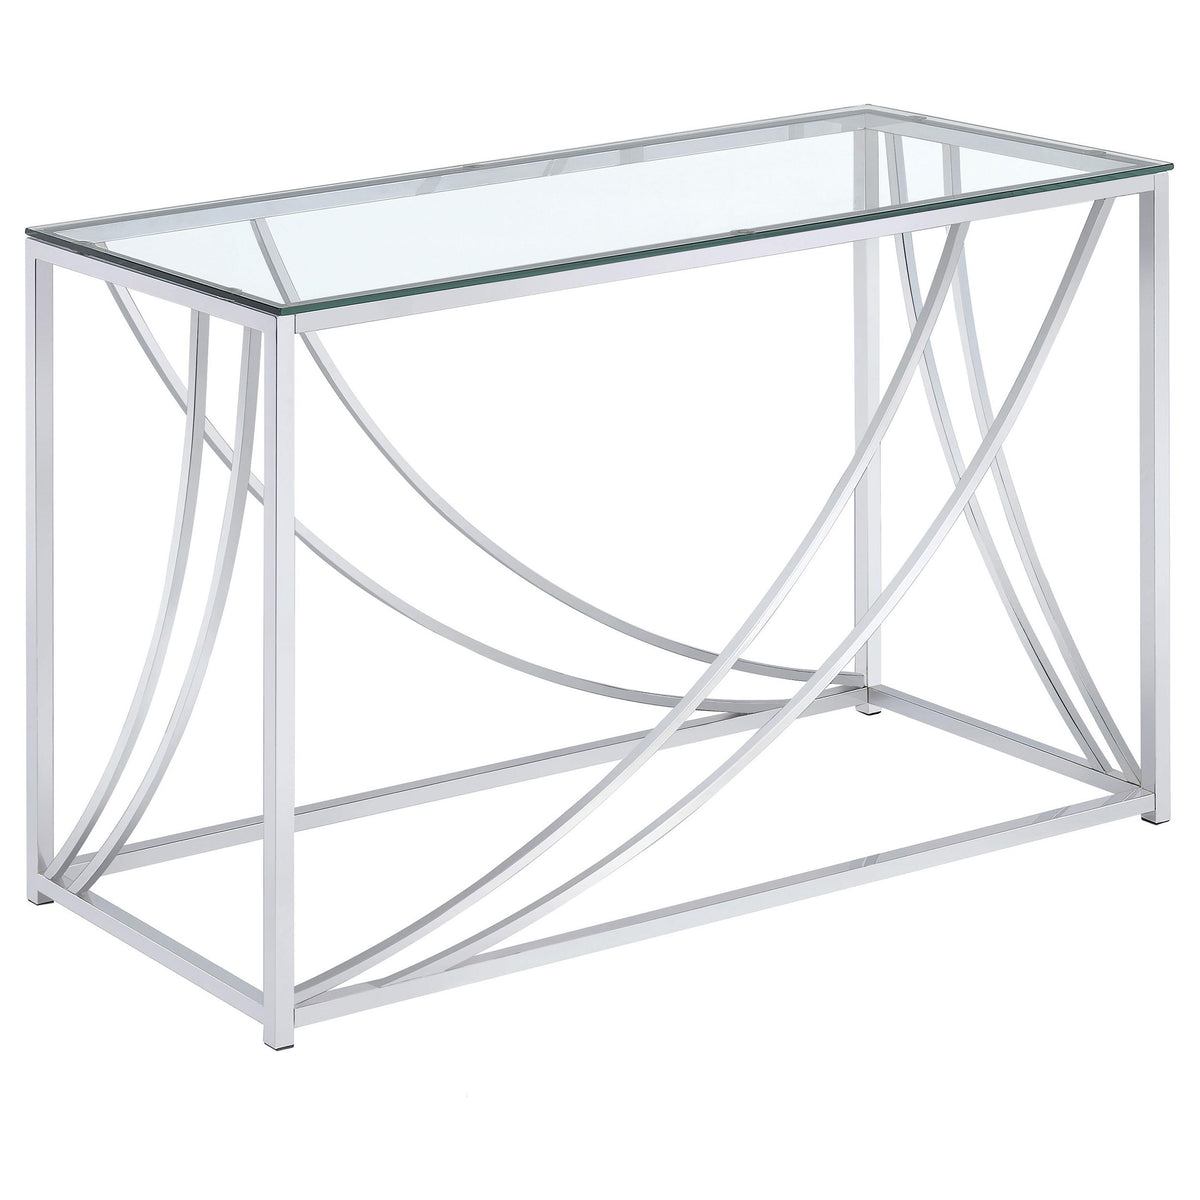 Lille Glass Top Rectangular Sofa Table Accents Chrome  Las Vegas Furniture Stores